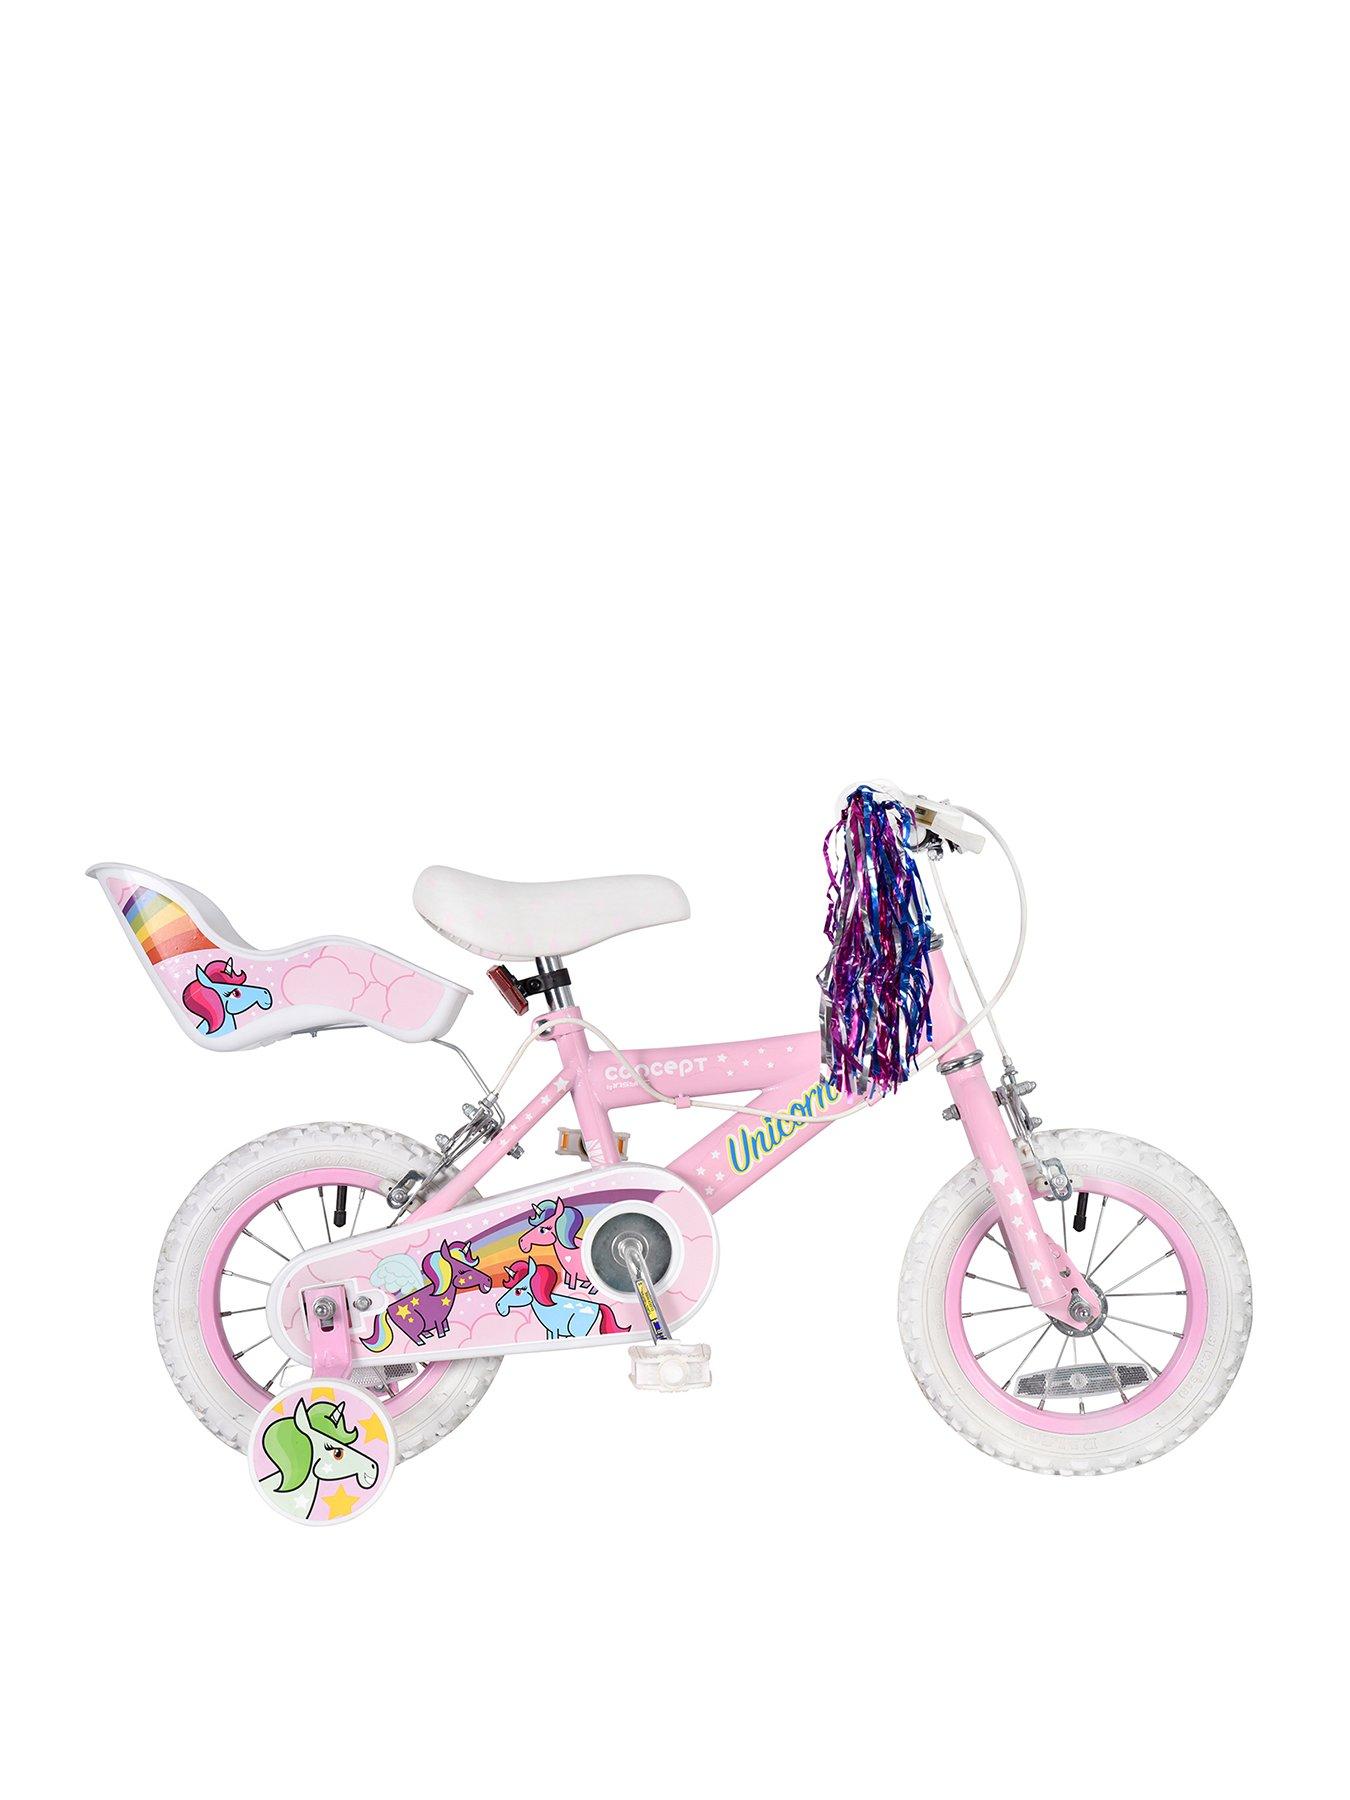 bike for 3 year old uk